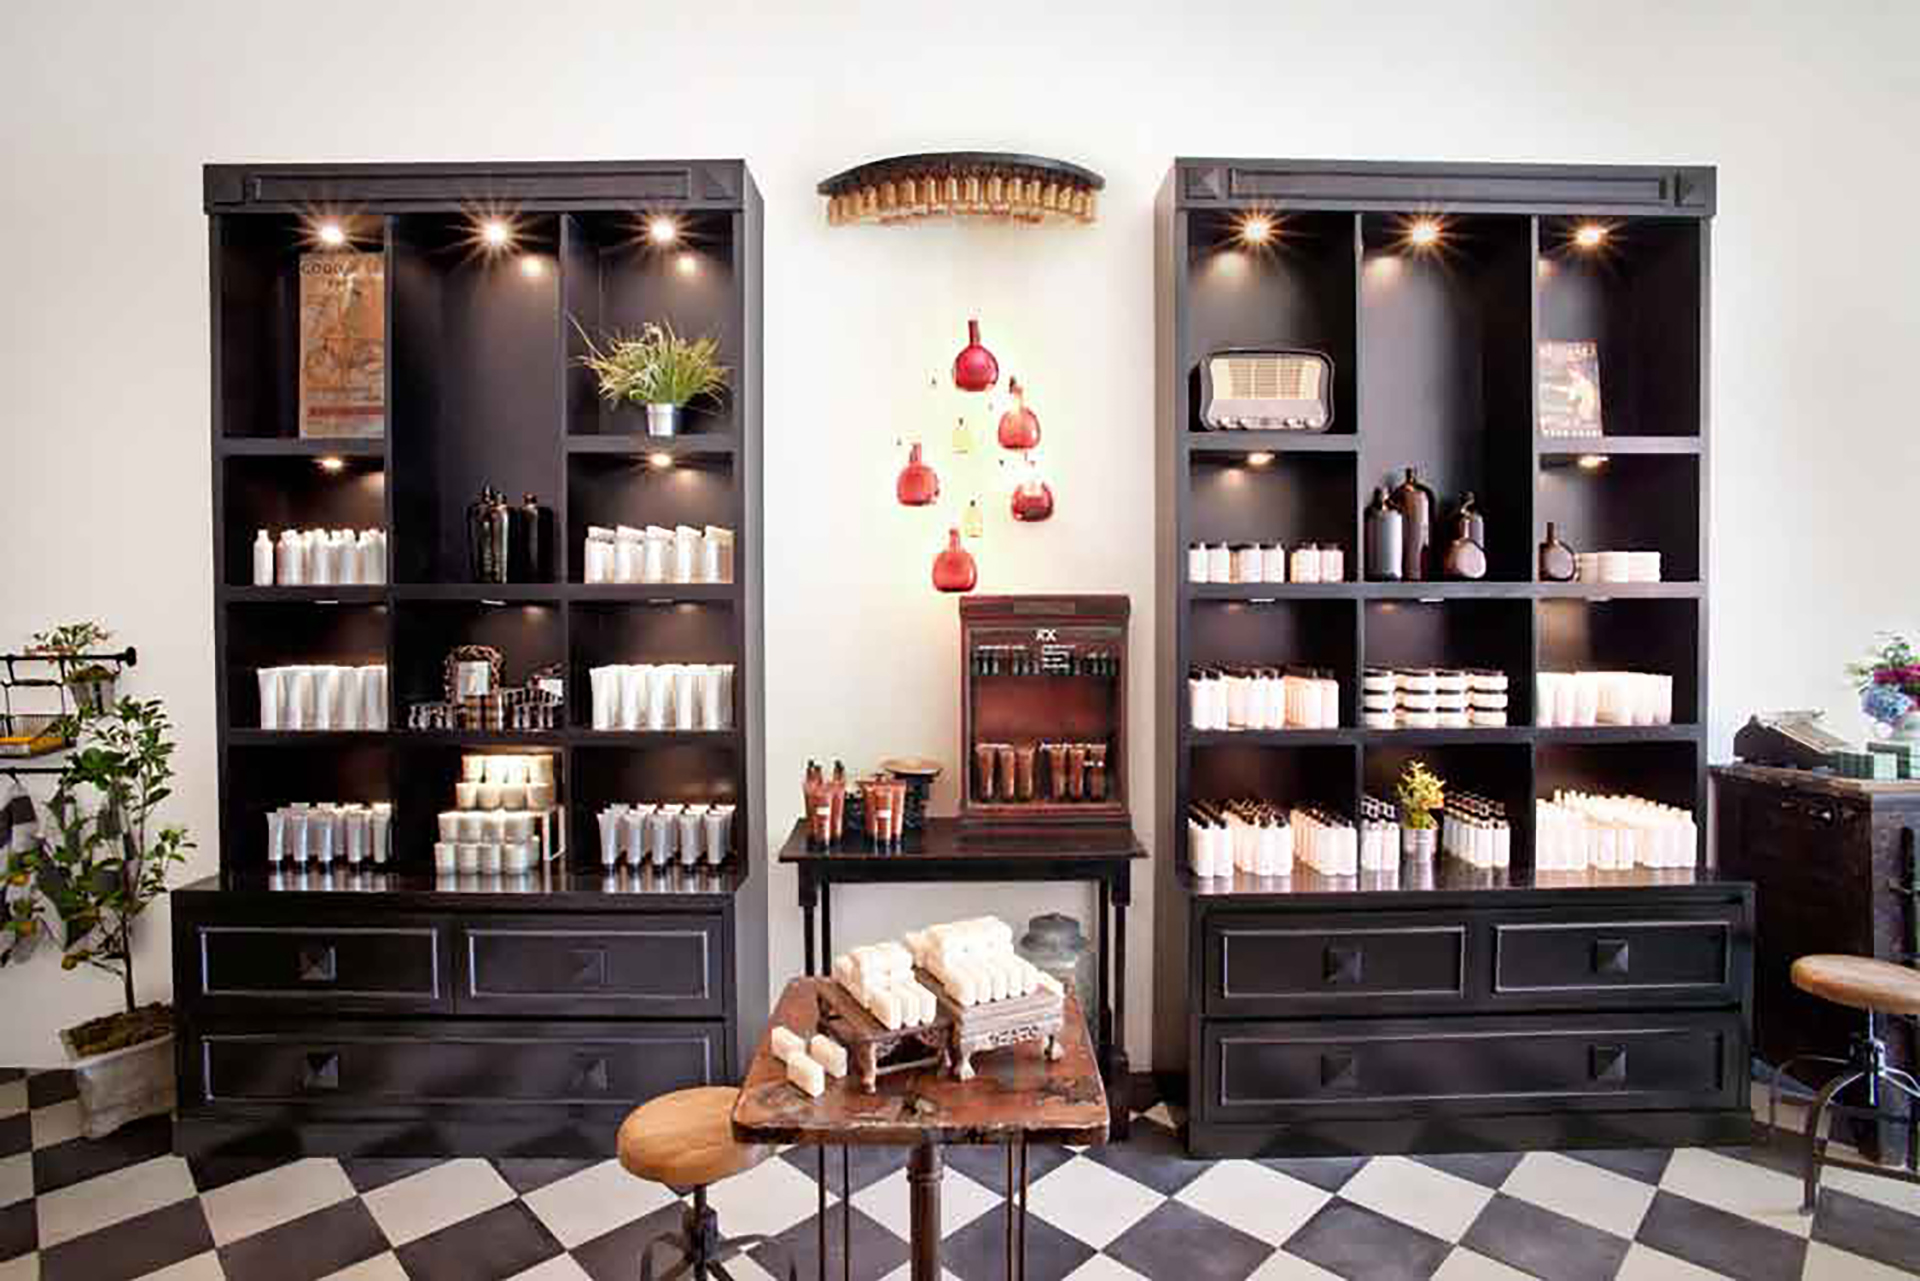 GEE for Bathe store design displays